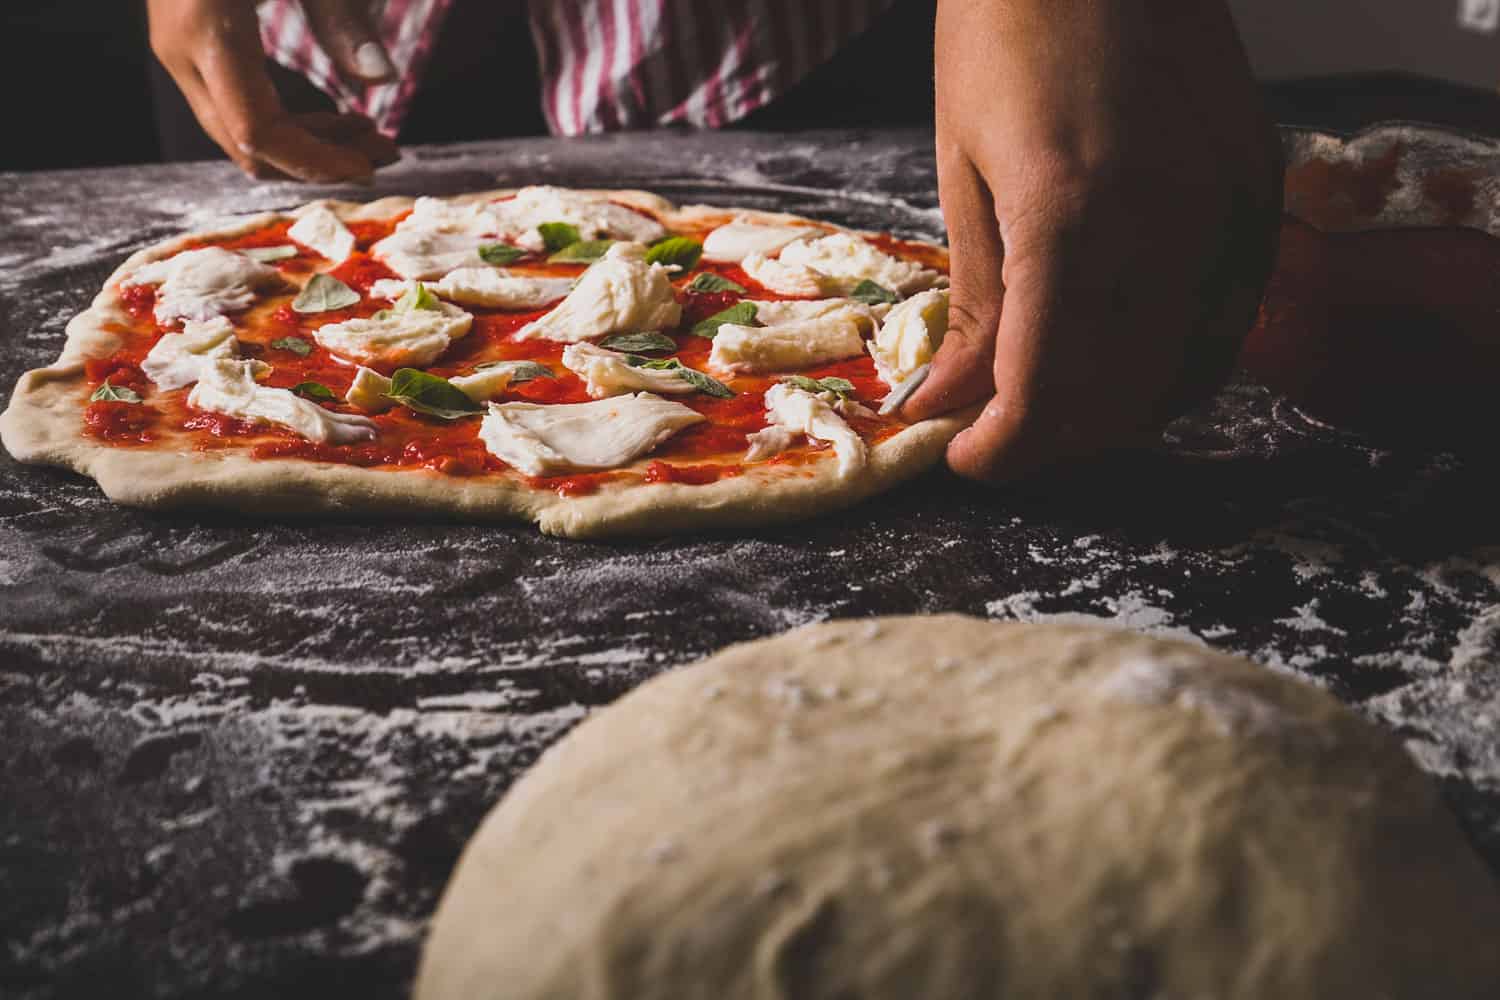 Yummy Pizza and dough perfectly combined